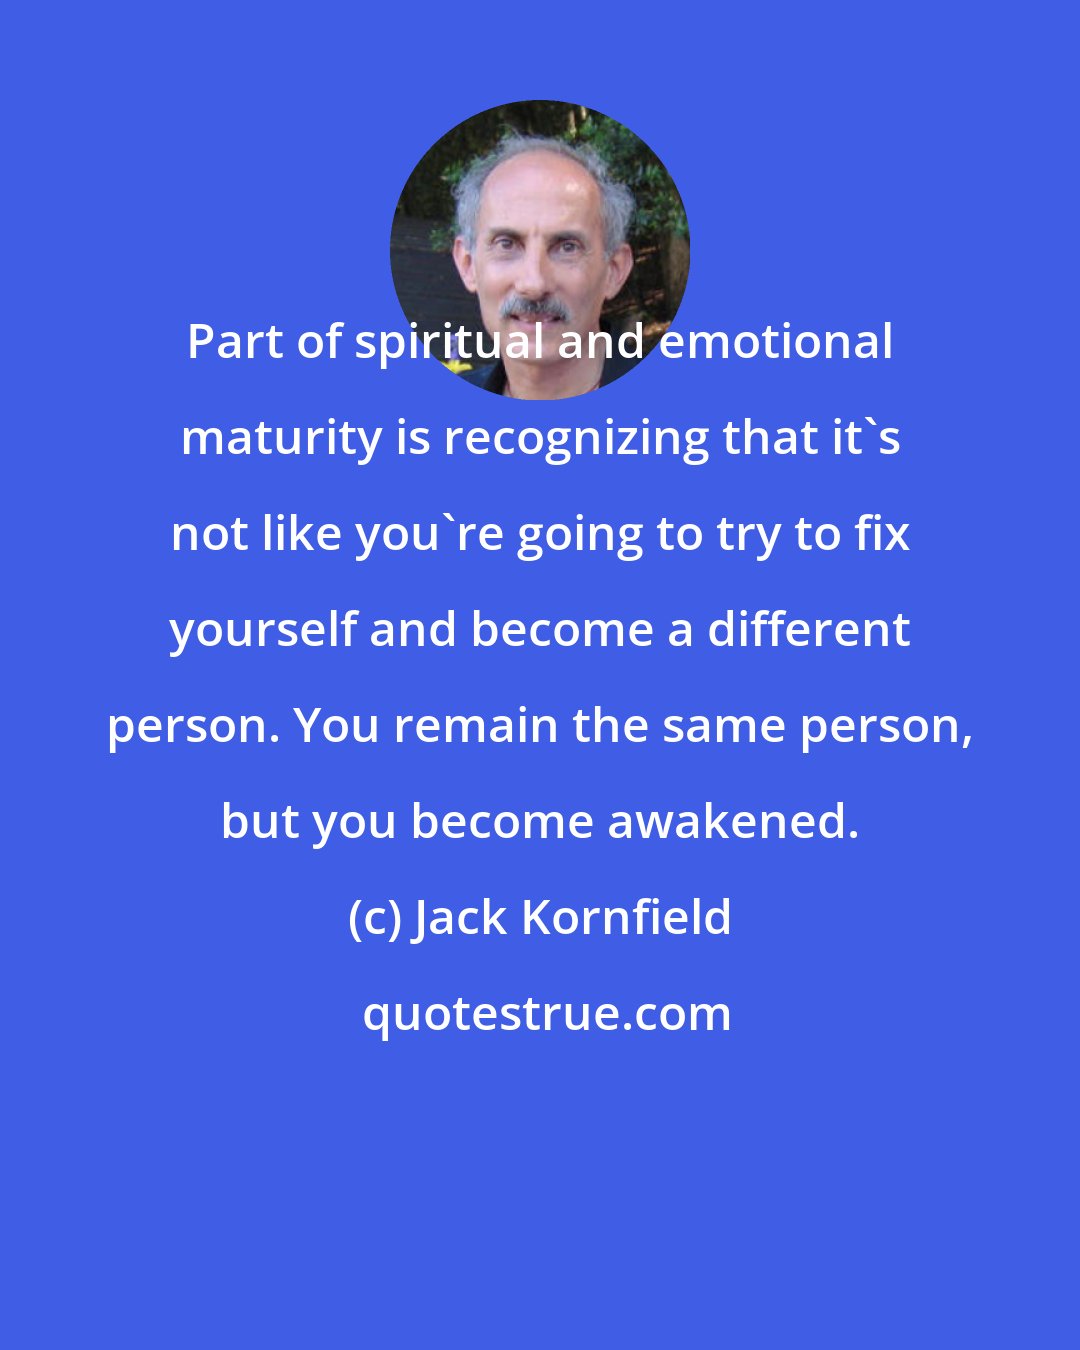 Jack Kornfield: Part of spiritual and emotional maturity is recognizing that it's not like you're going to try to fix yourself and become a different person. You remain the same person, but you become awakened.